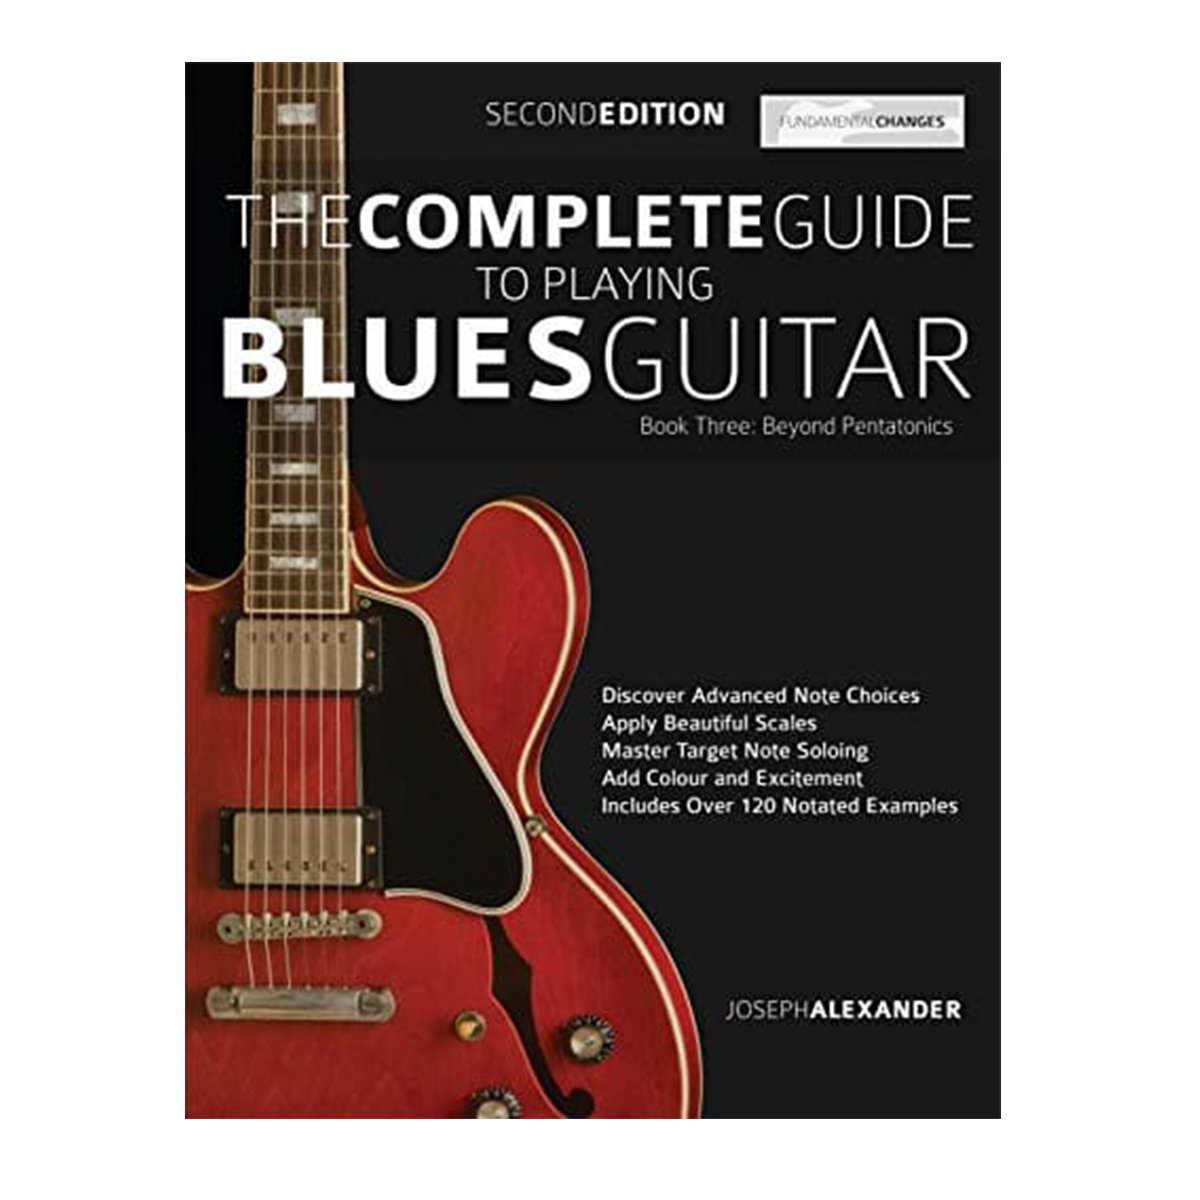 The Complete Guide To Playing Blues Guitar